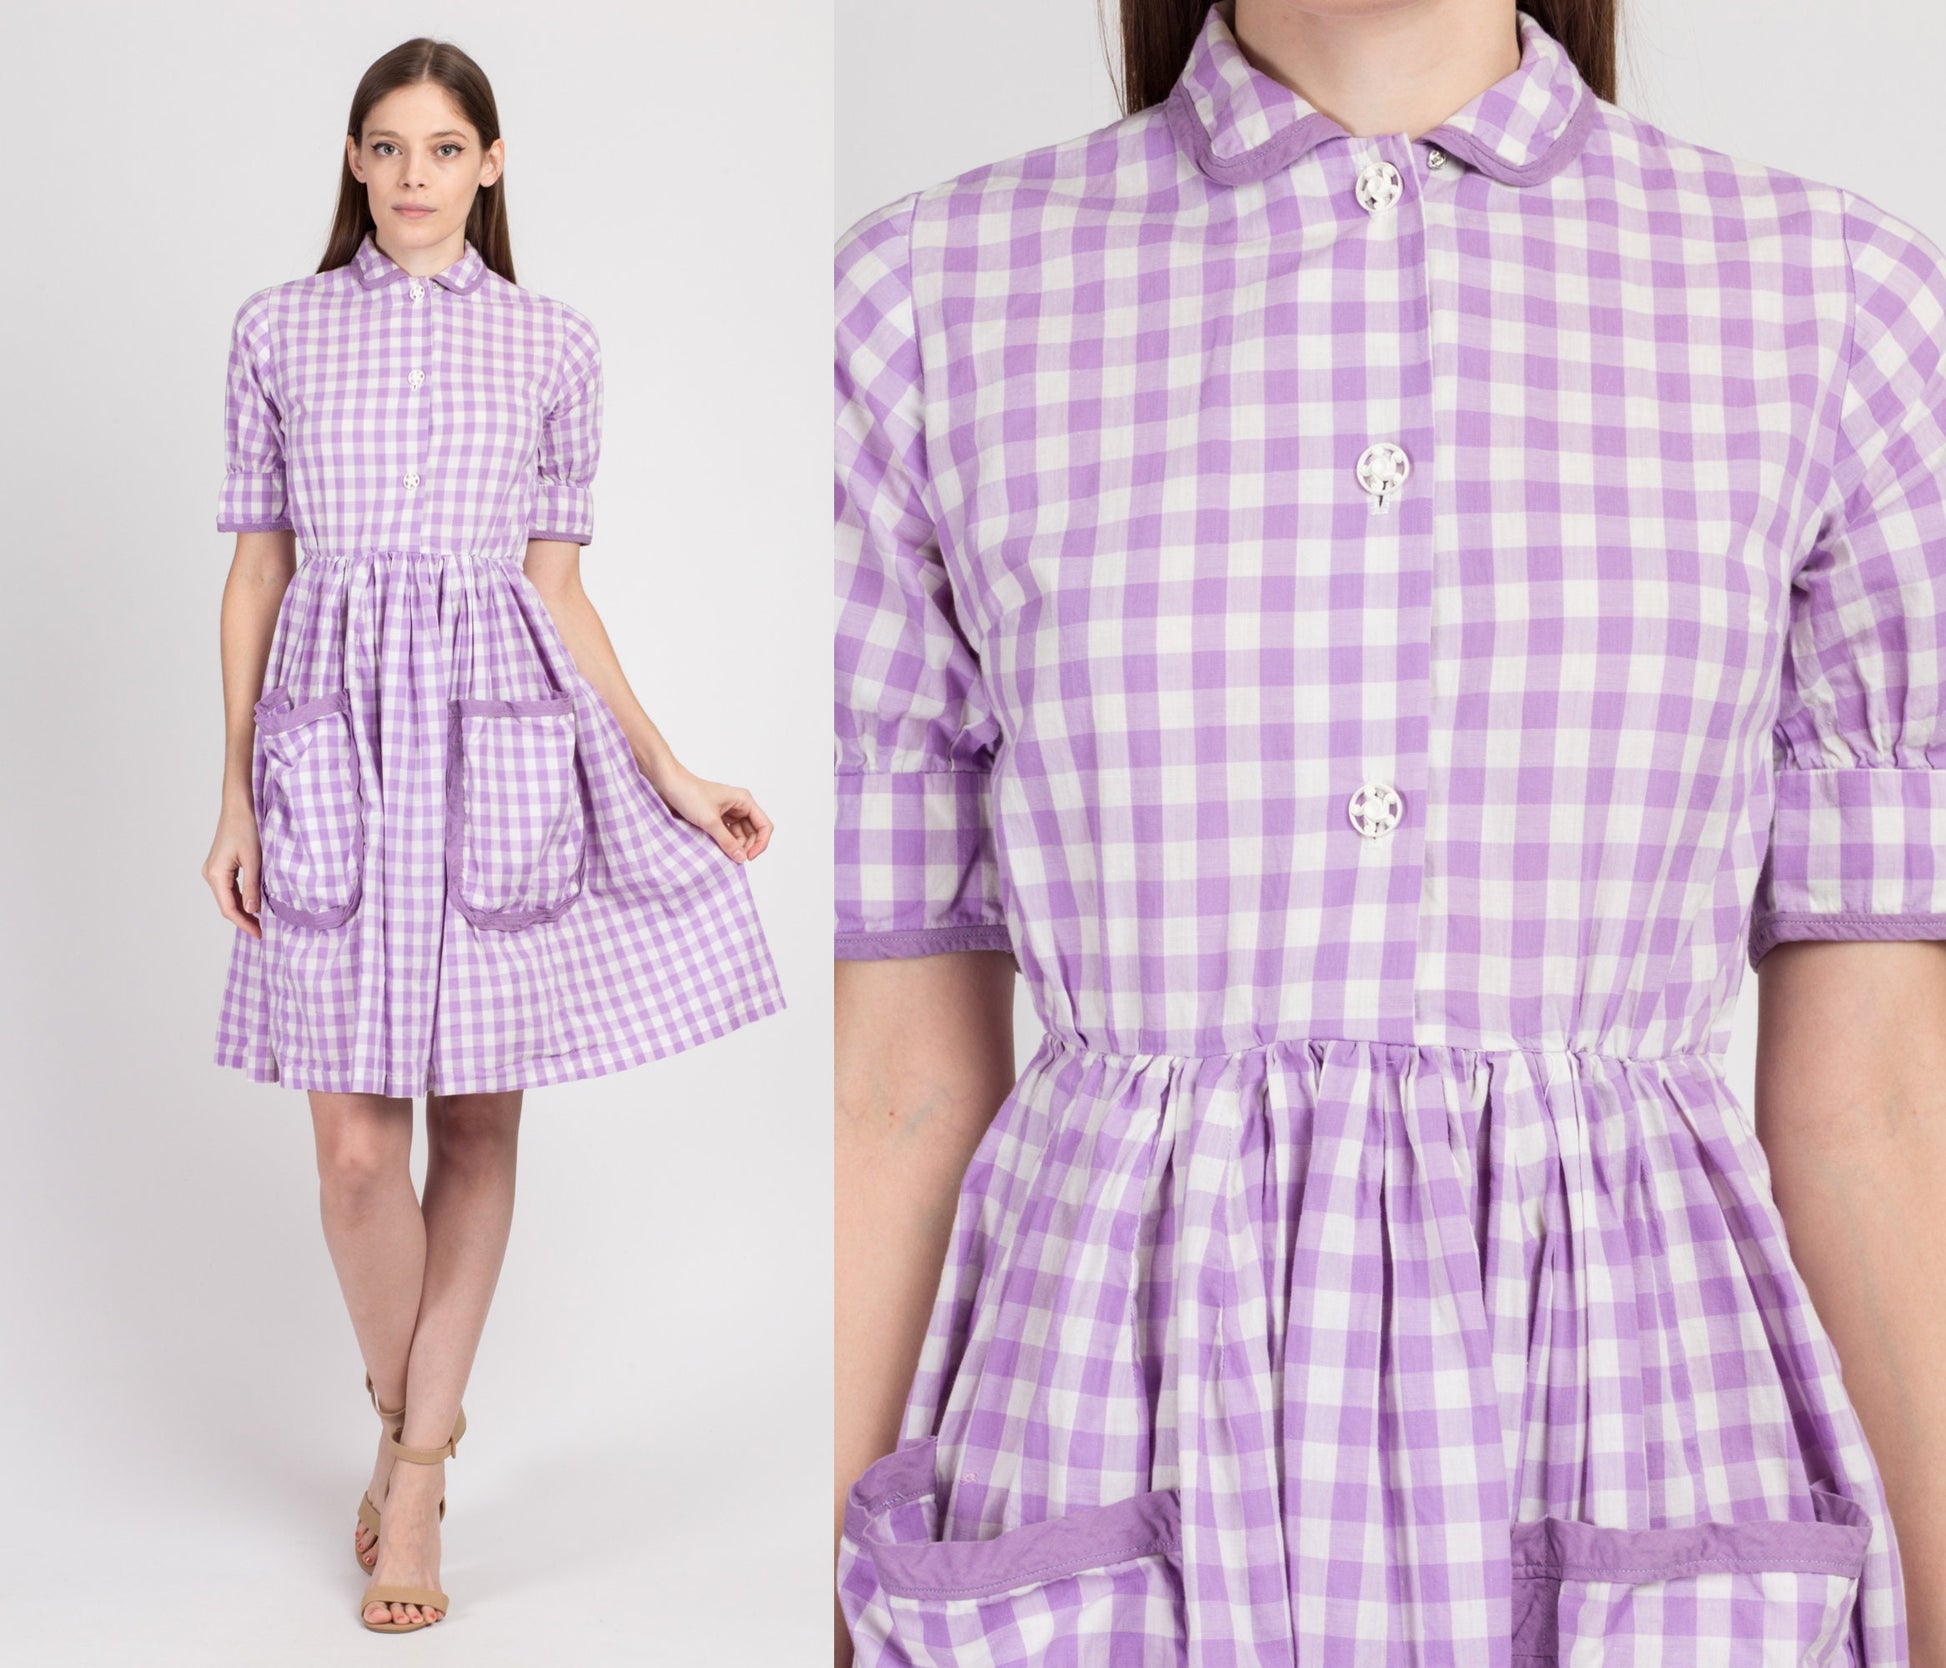 Vintage 1940s Purple Gingham Checkered Day Dress - Petite XS 